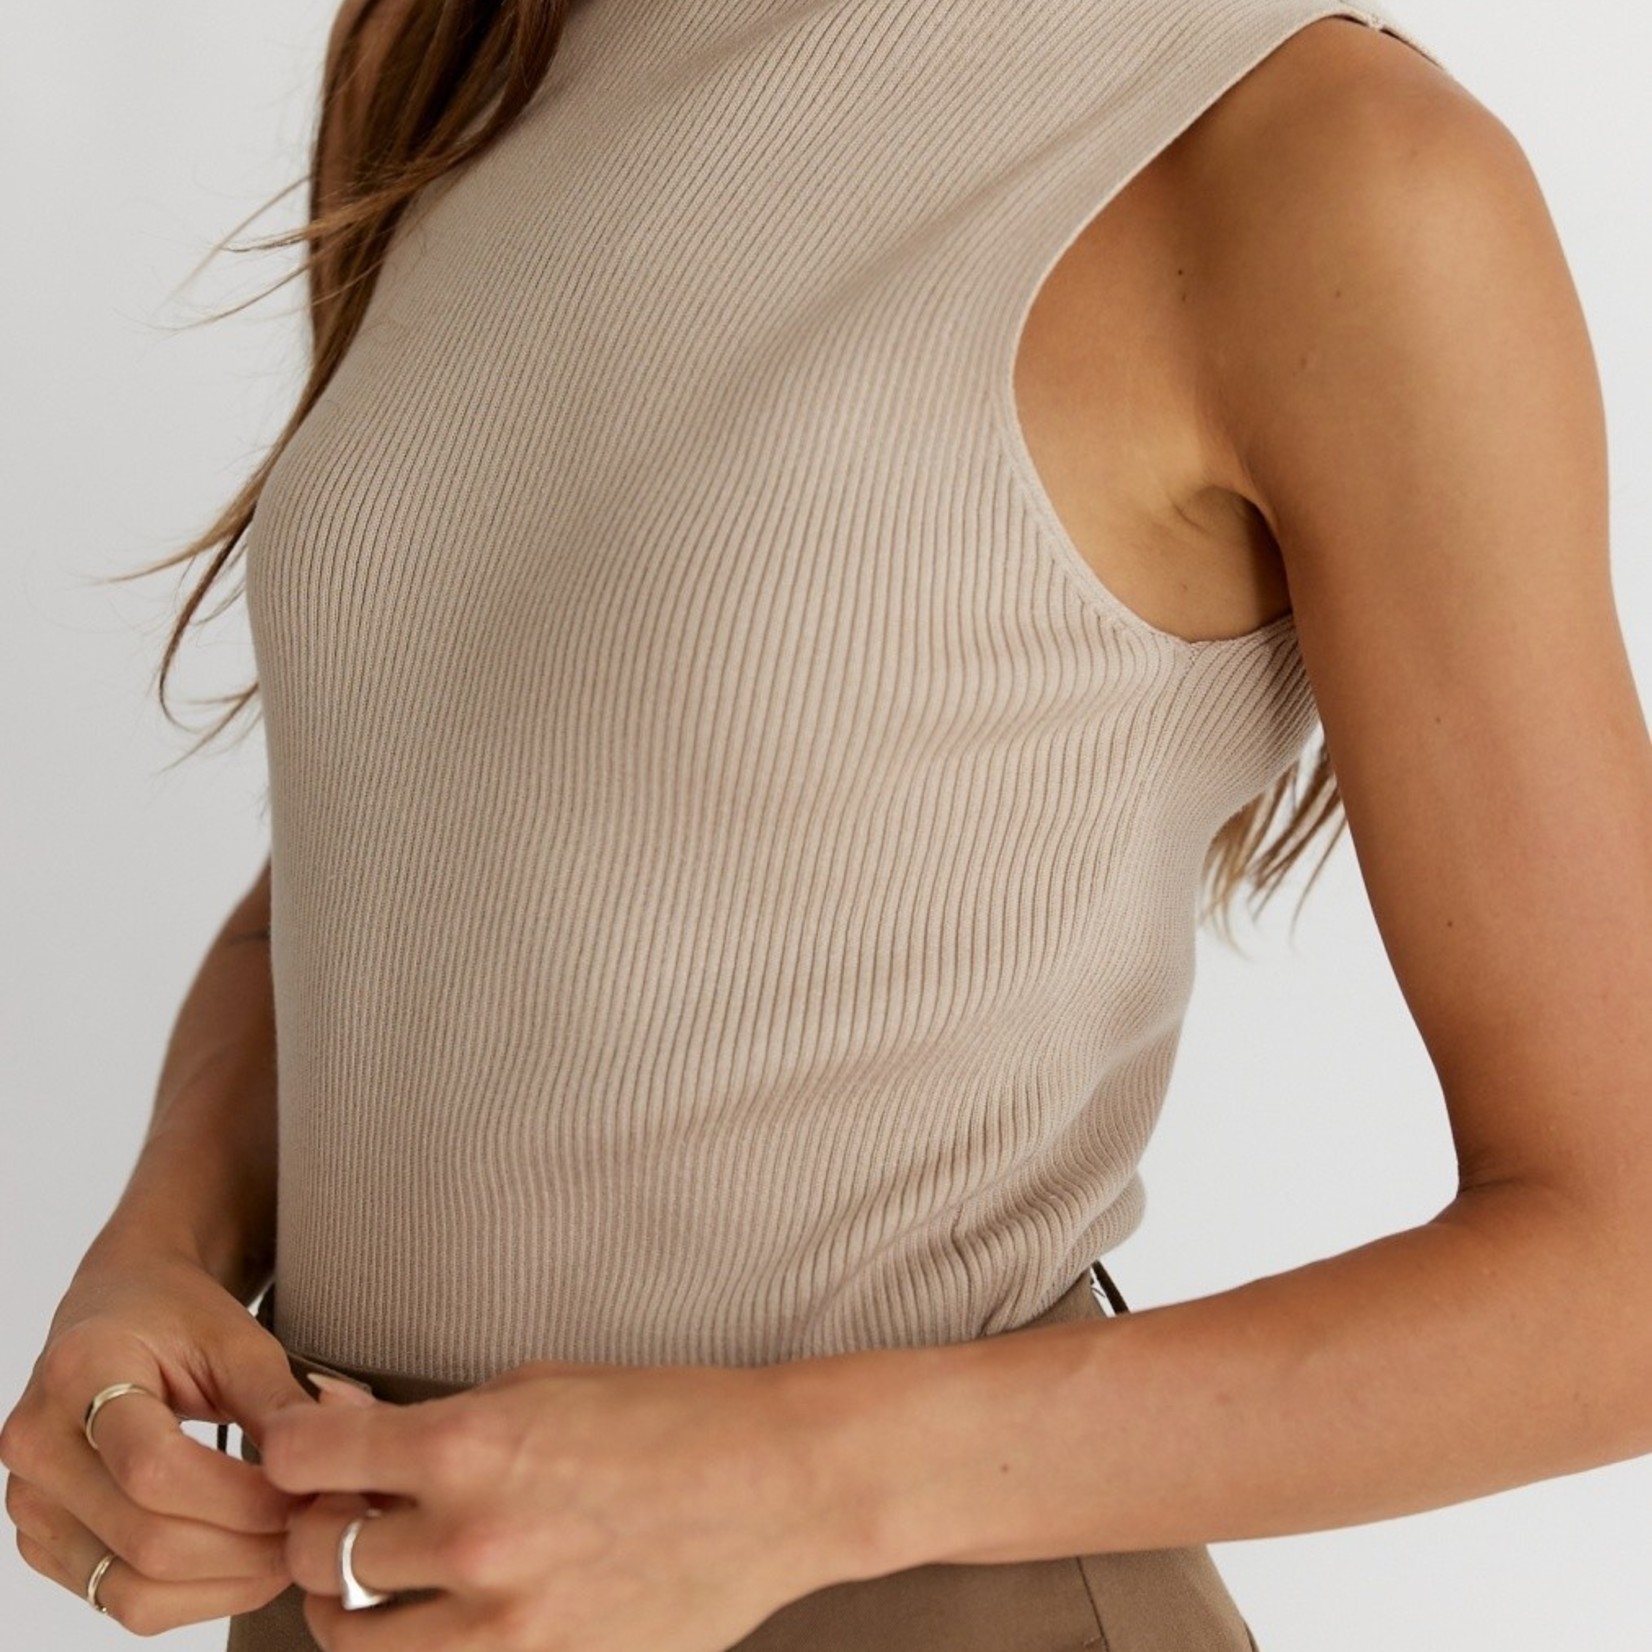 The Nadia Top